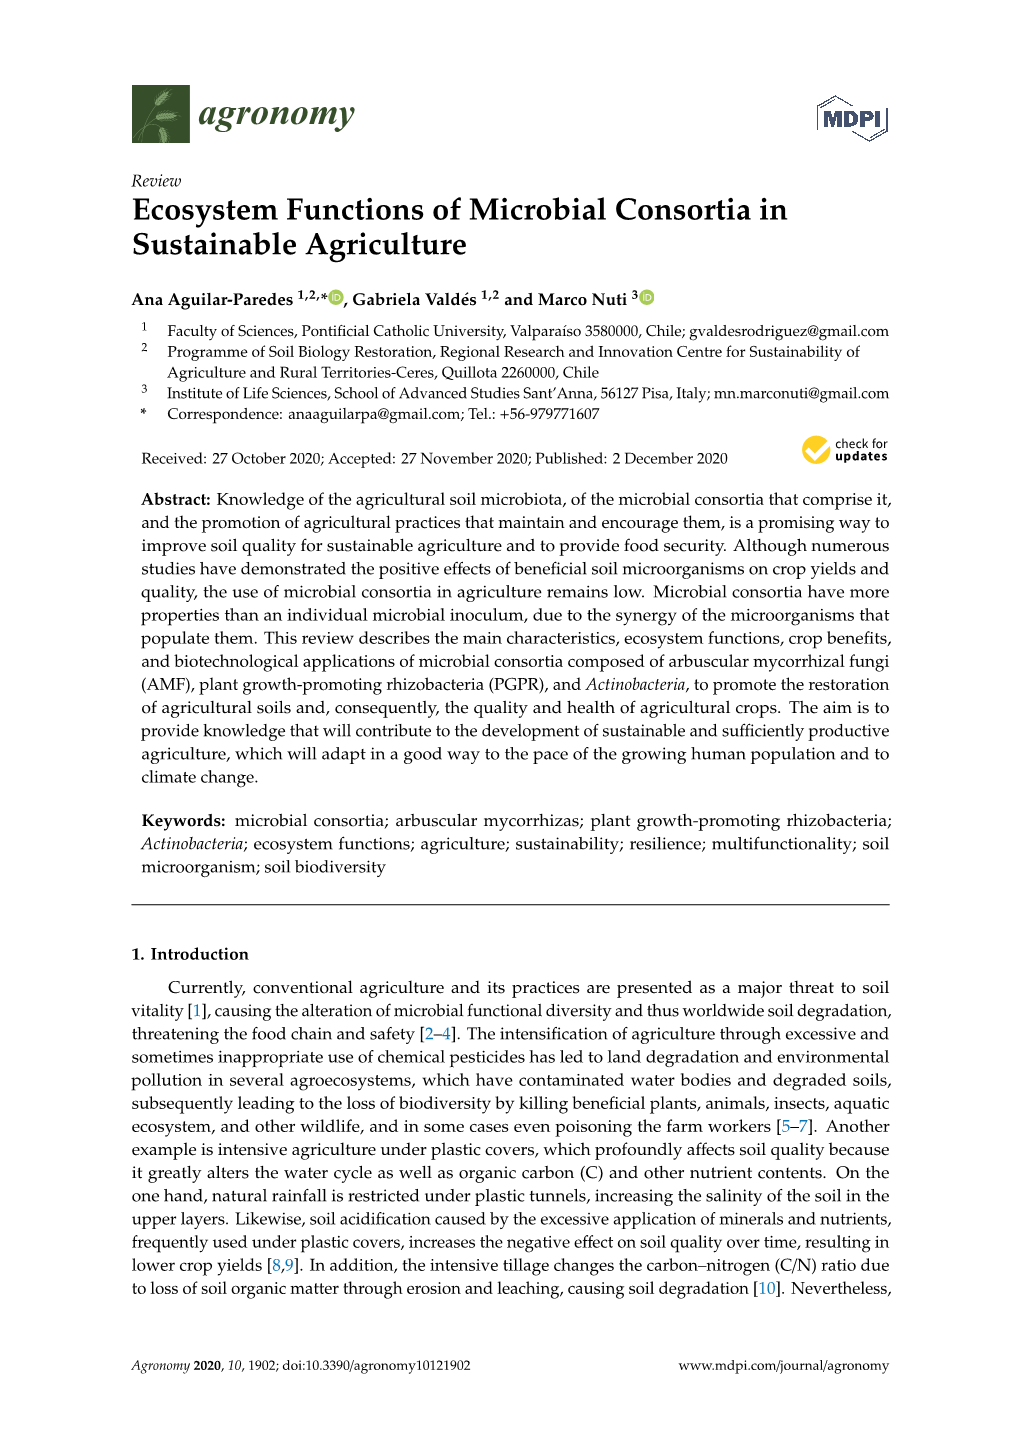 Ecosystem Functions of Microbial Consortia in Sustainable Agriculture